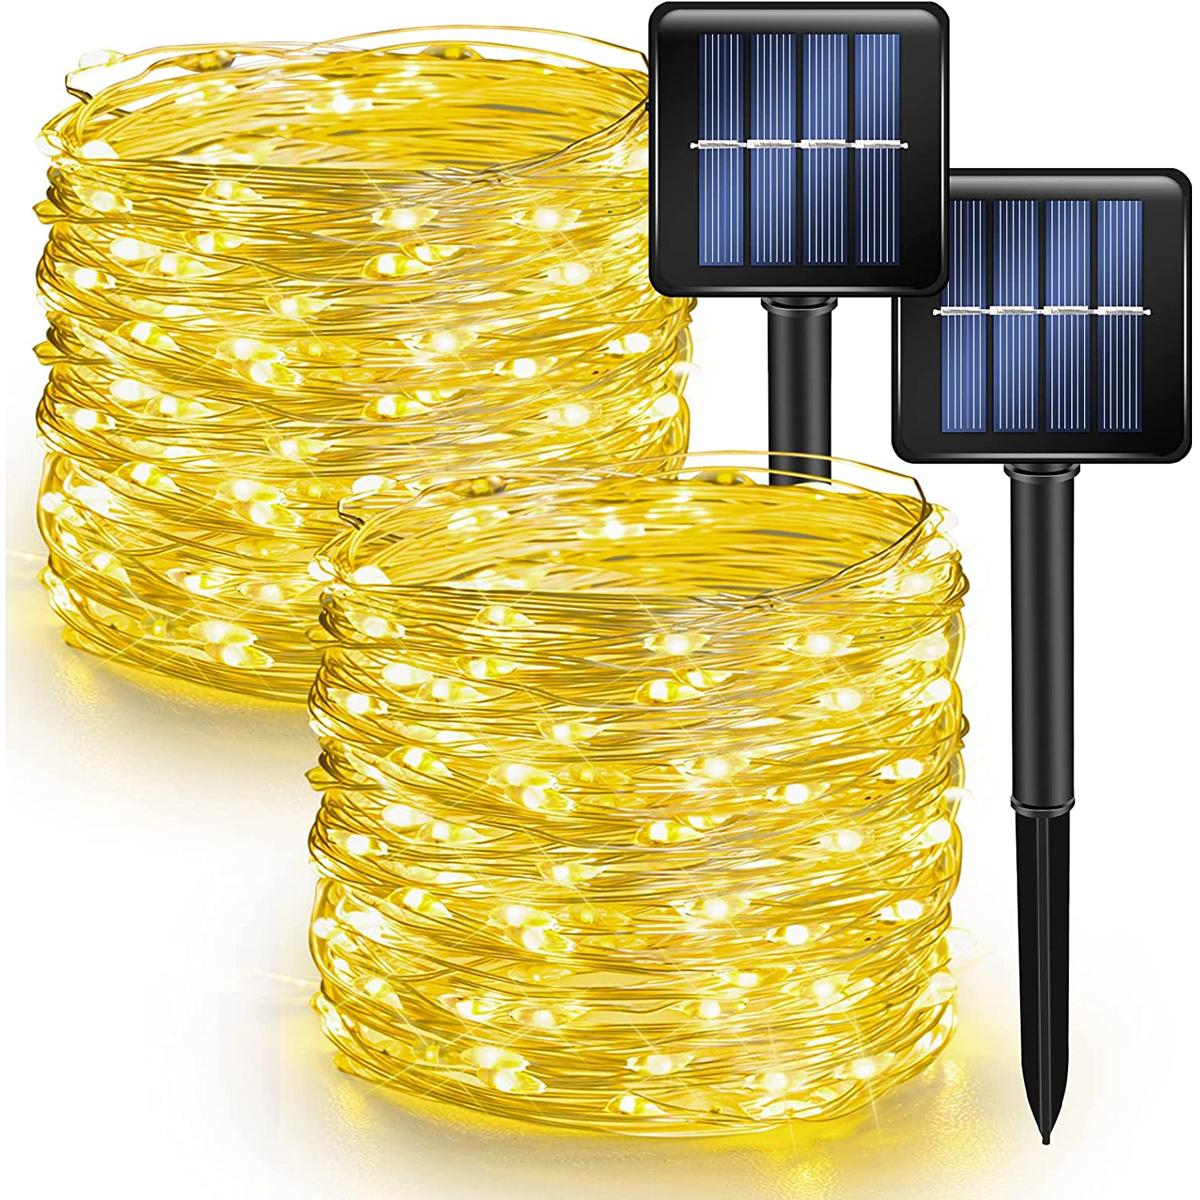 Dazzle Bright Outdoor LED Solar String Lights 2 Pack for $9.93